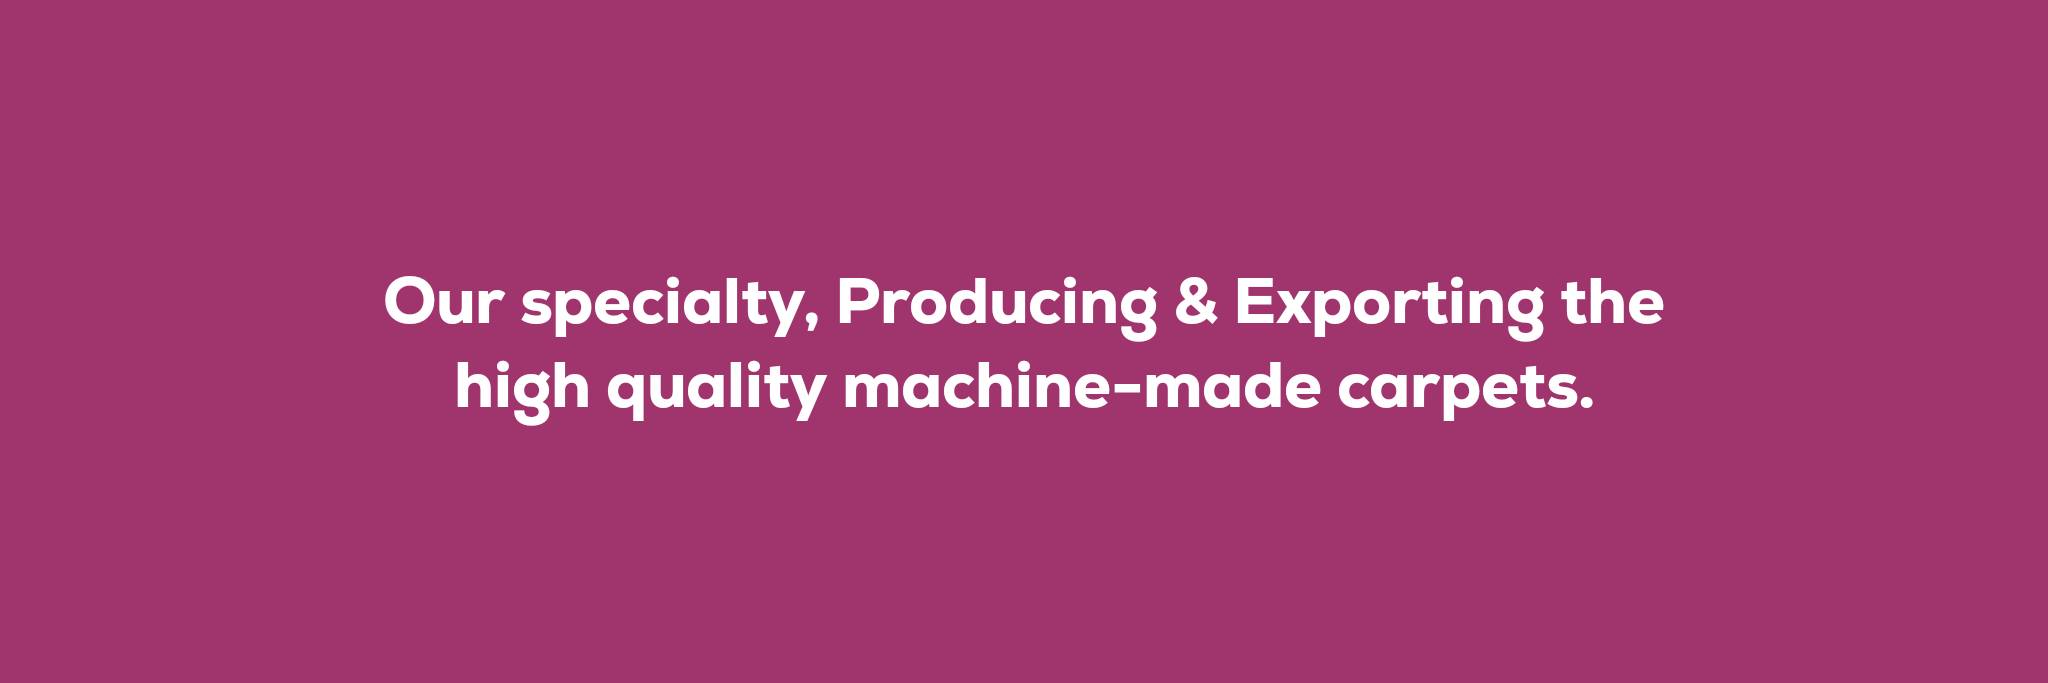 Our specialty, Producing & Exporting the high quality machine-made carpets.